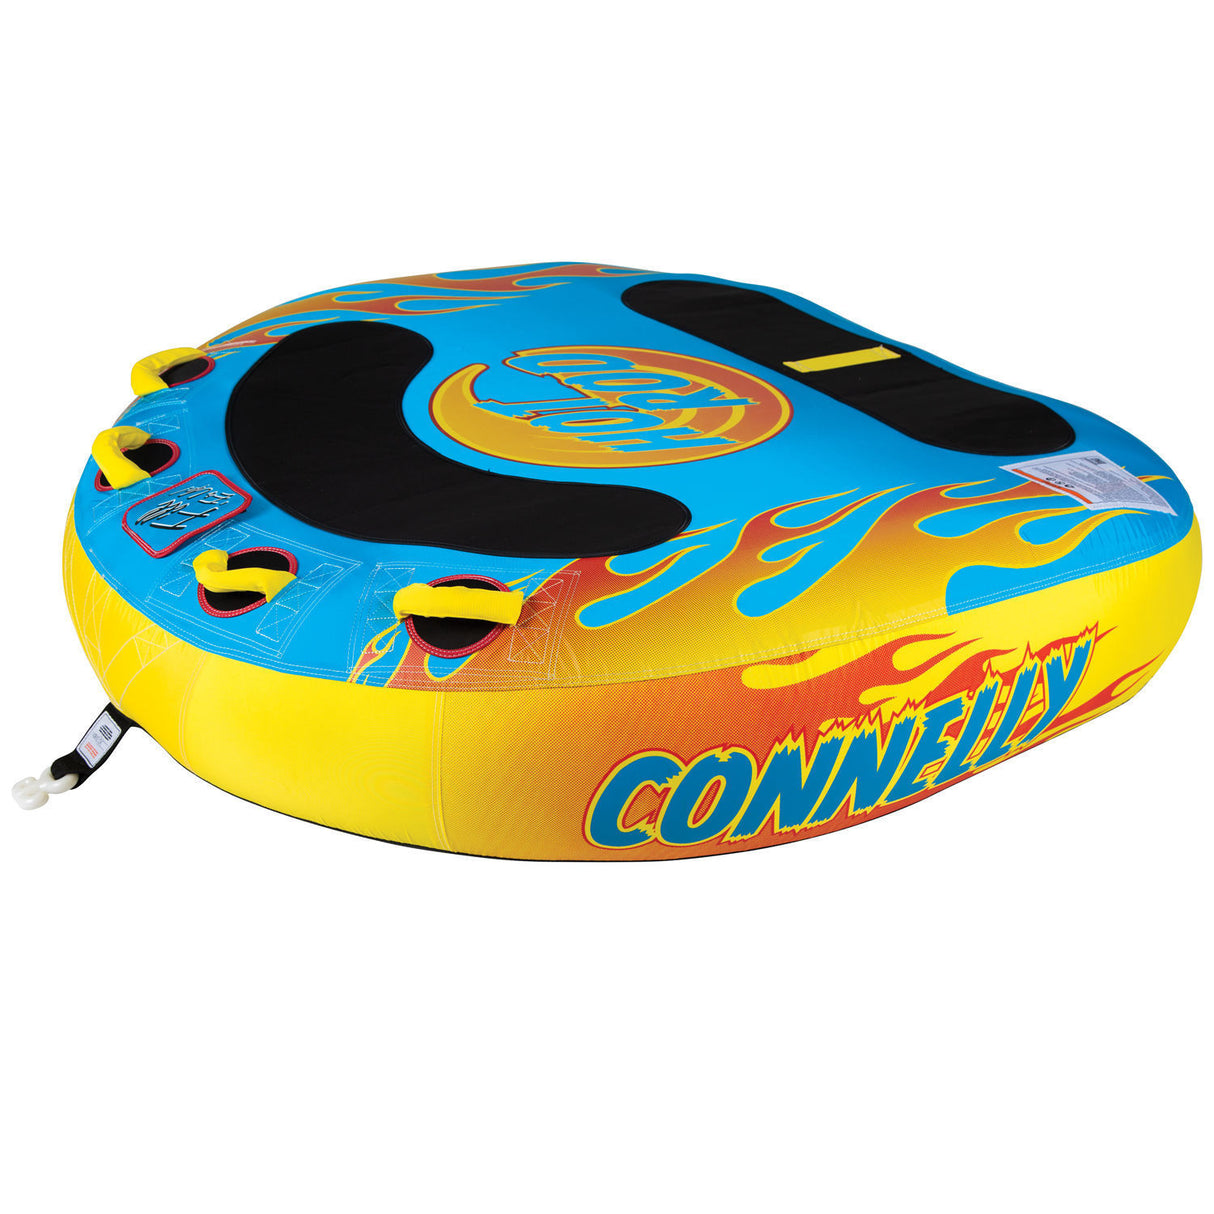 Connelly Hot Rod Tube - 2 Rider